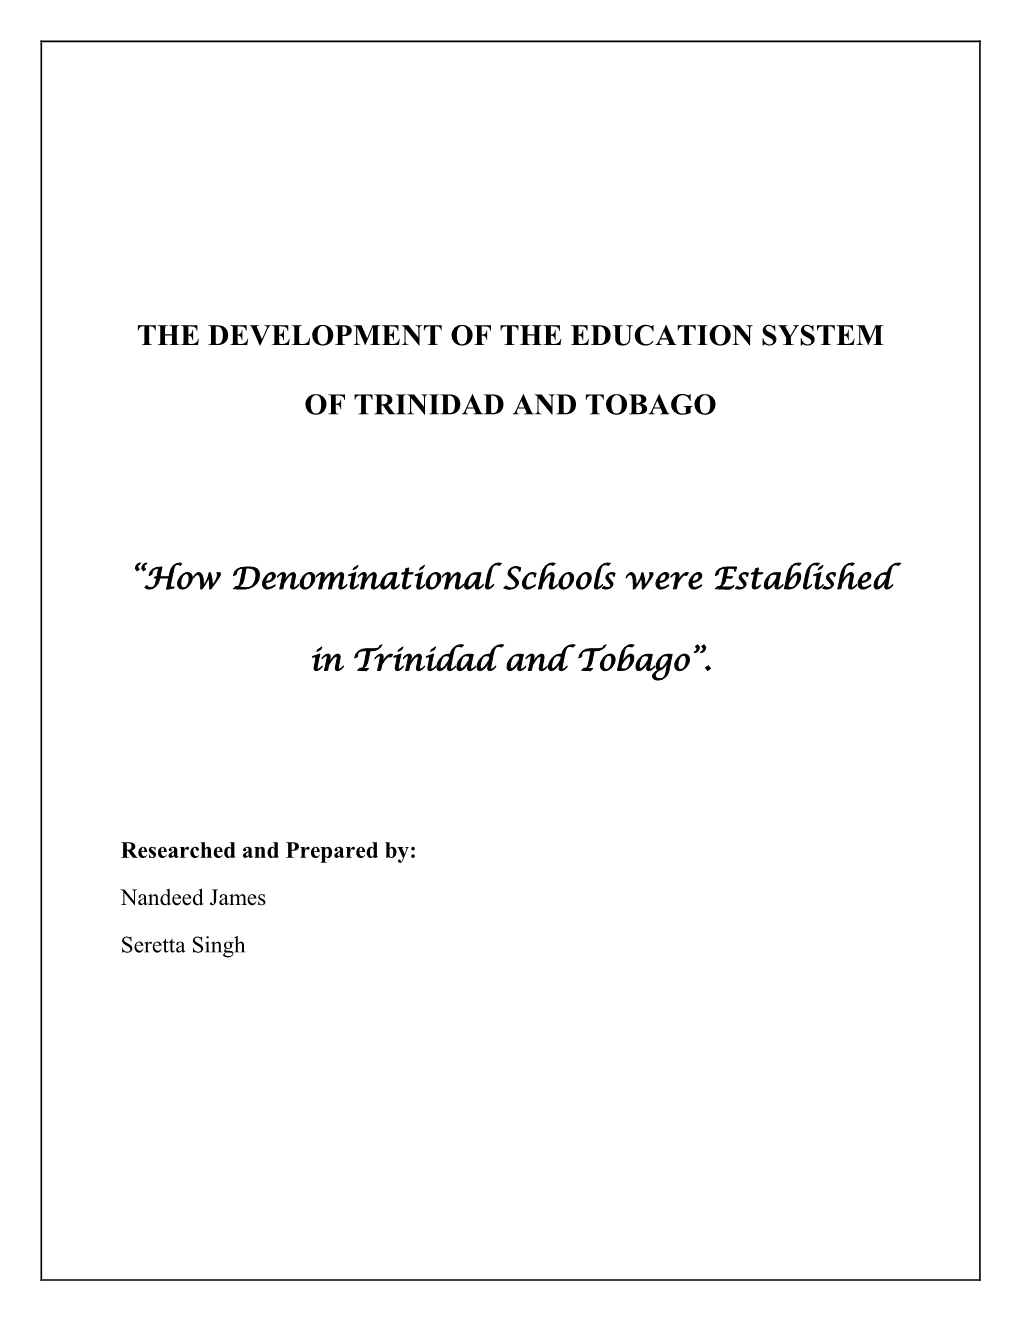 How Denominational Schools Were Established in Trinidad and To